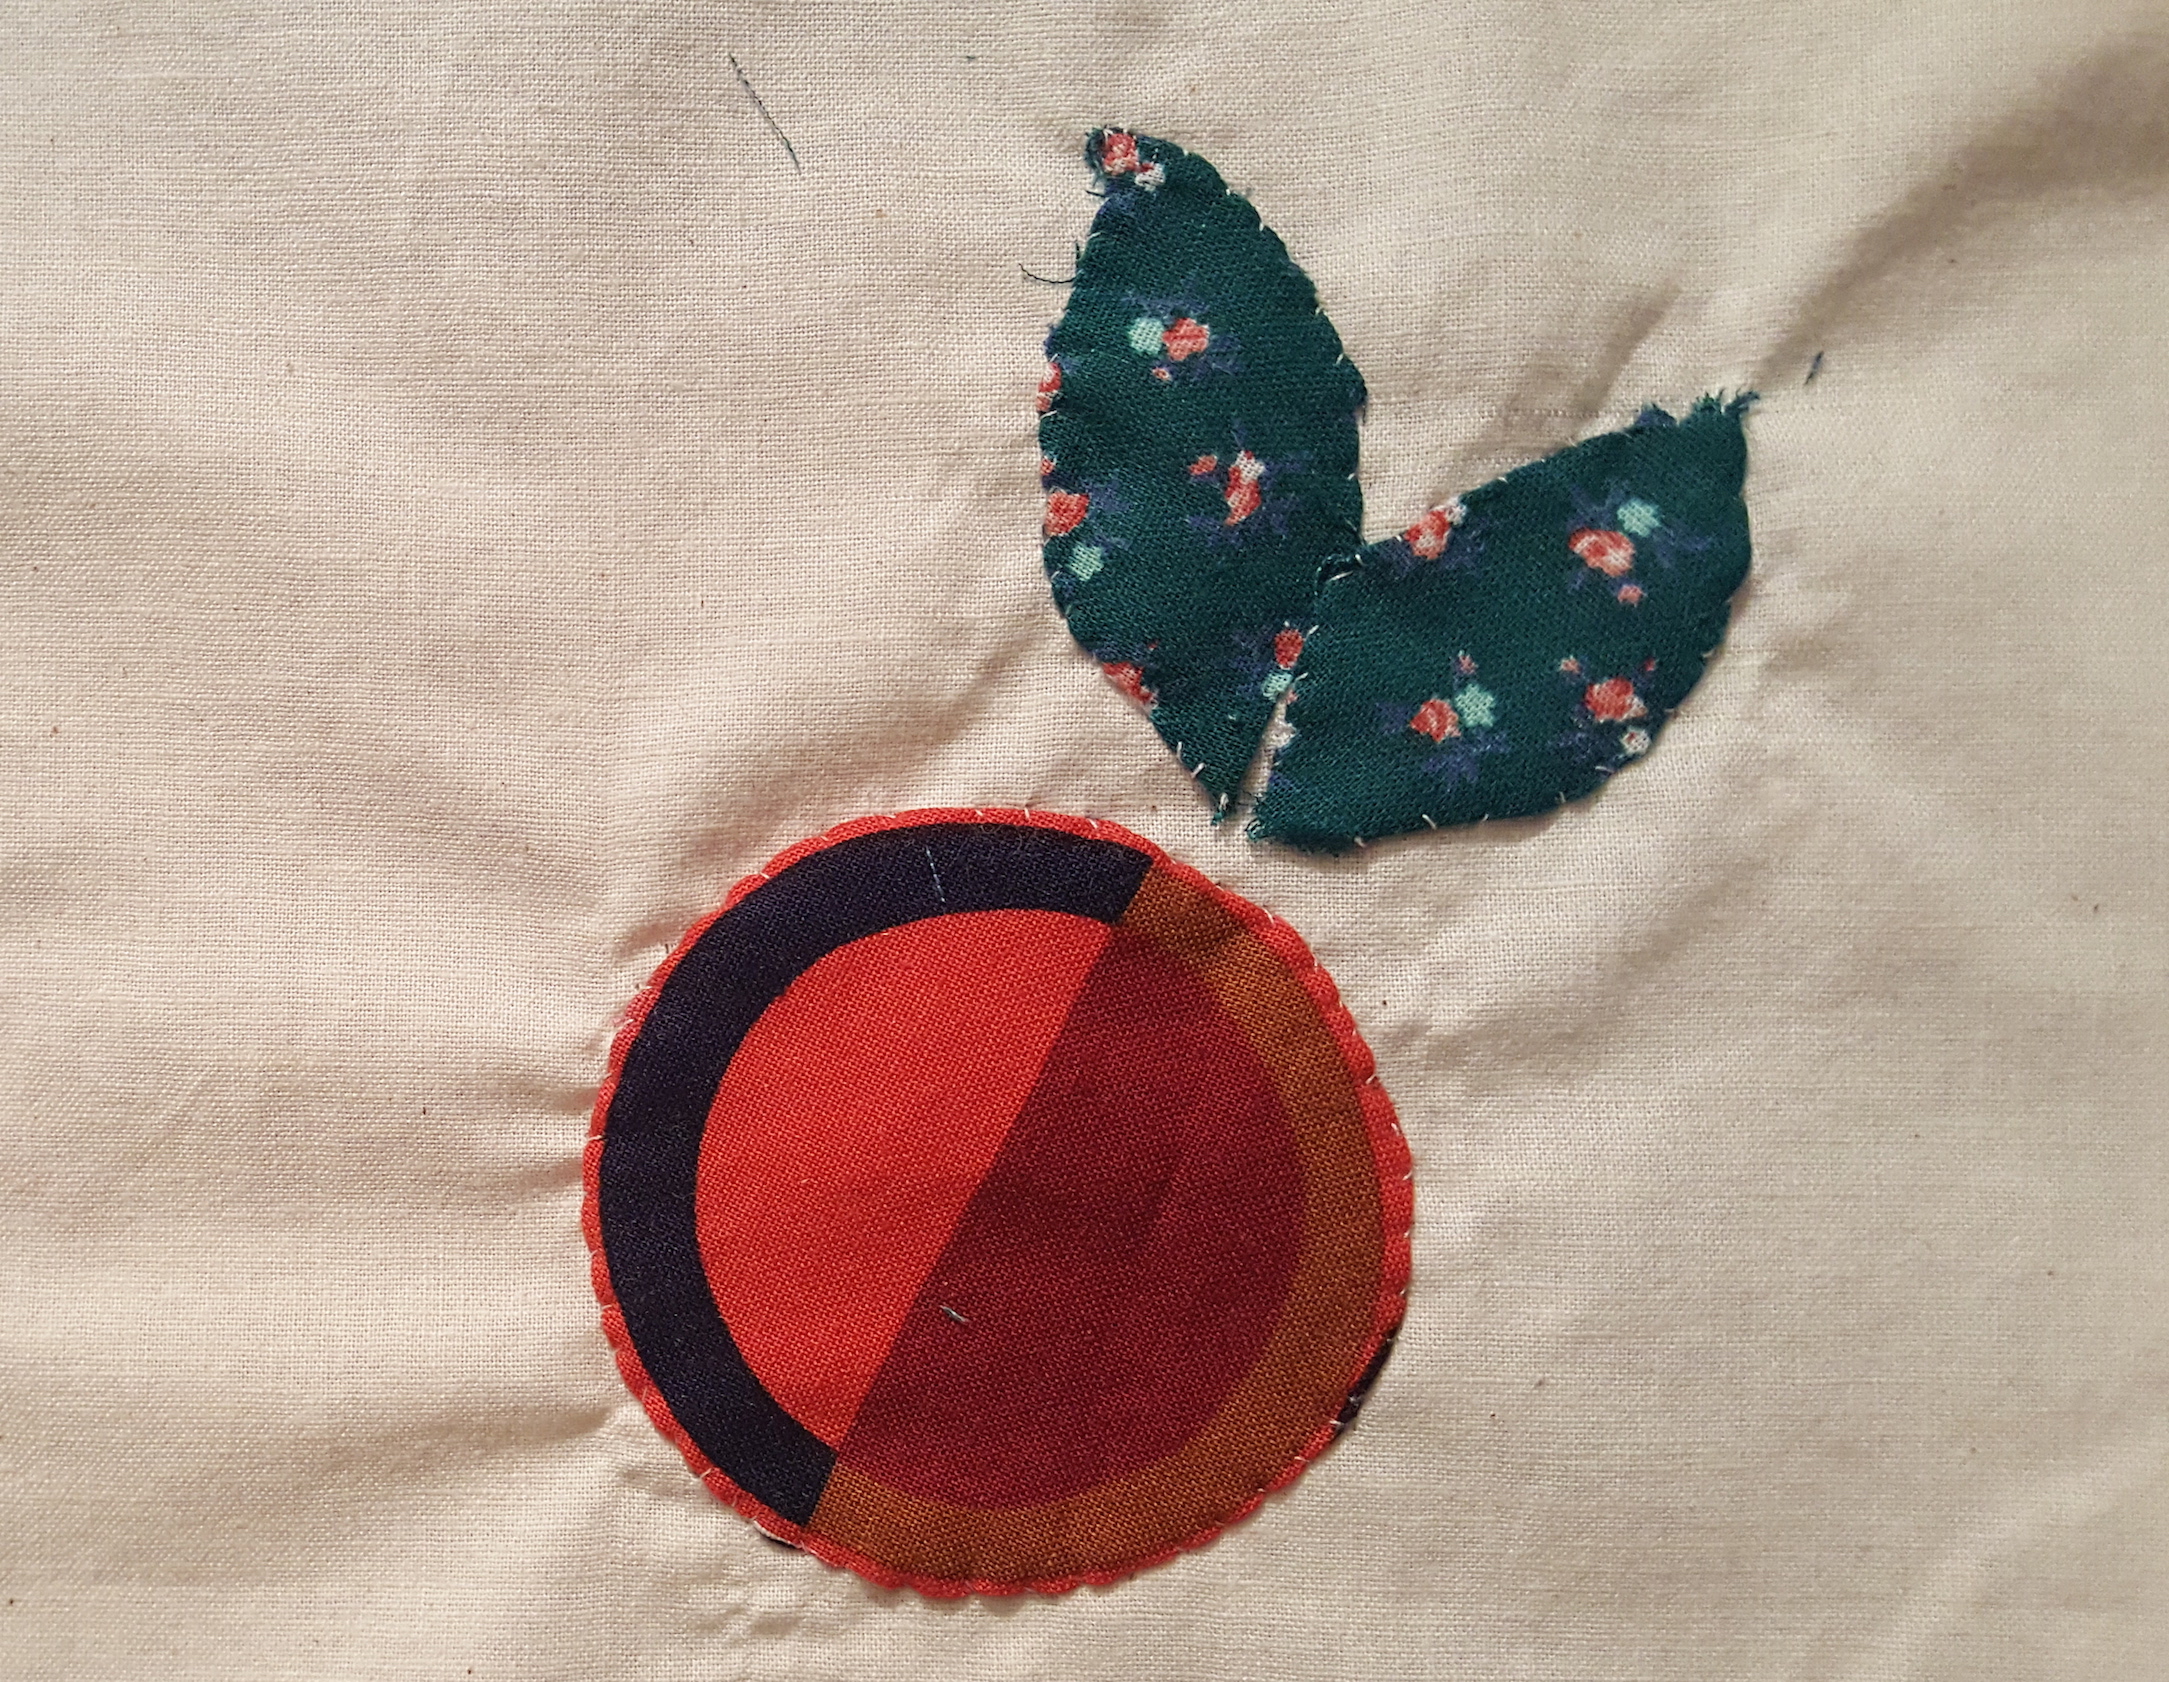 My practice square from this afternoon. It ain't perfect, yet, but so what! I love applique! Photo: Me.